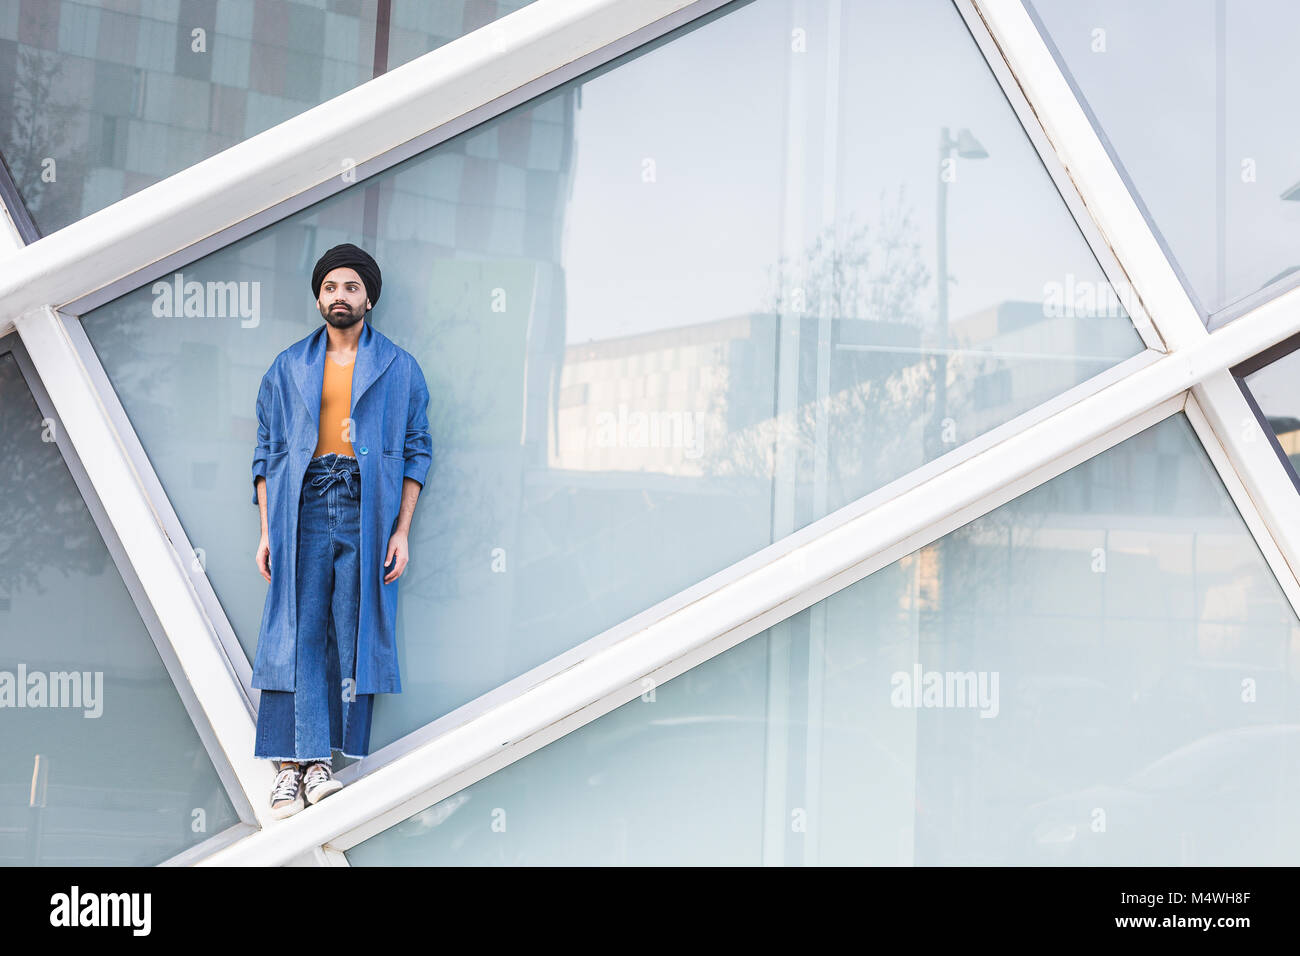 Handsome Indian man posing in an urban context. Street fashion and style. Stock Photo